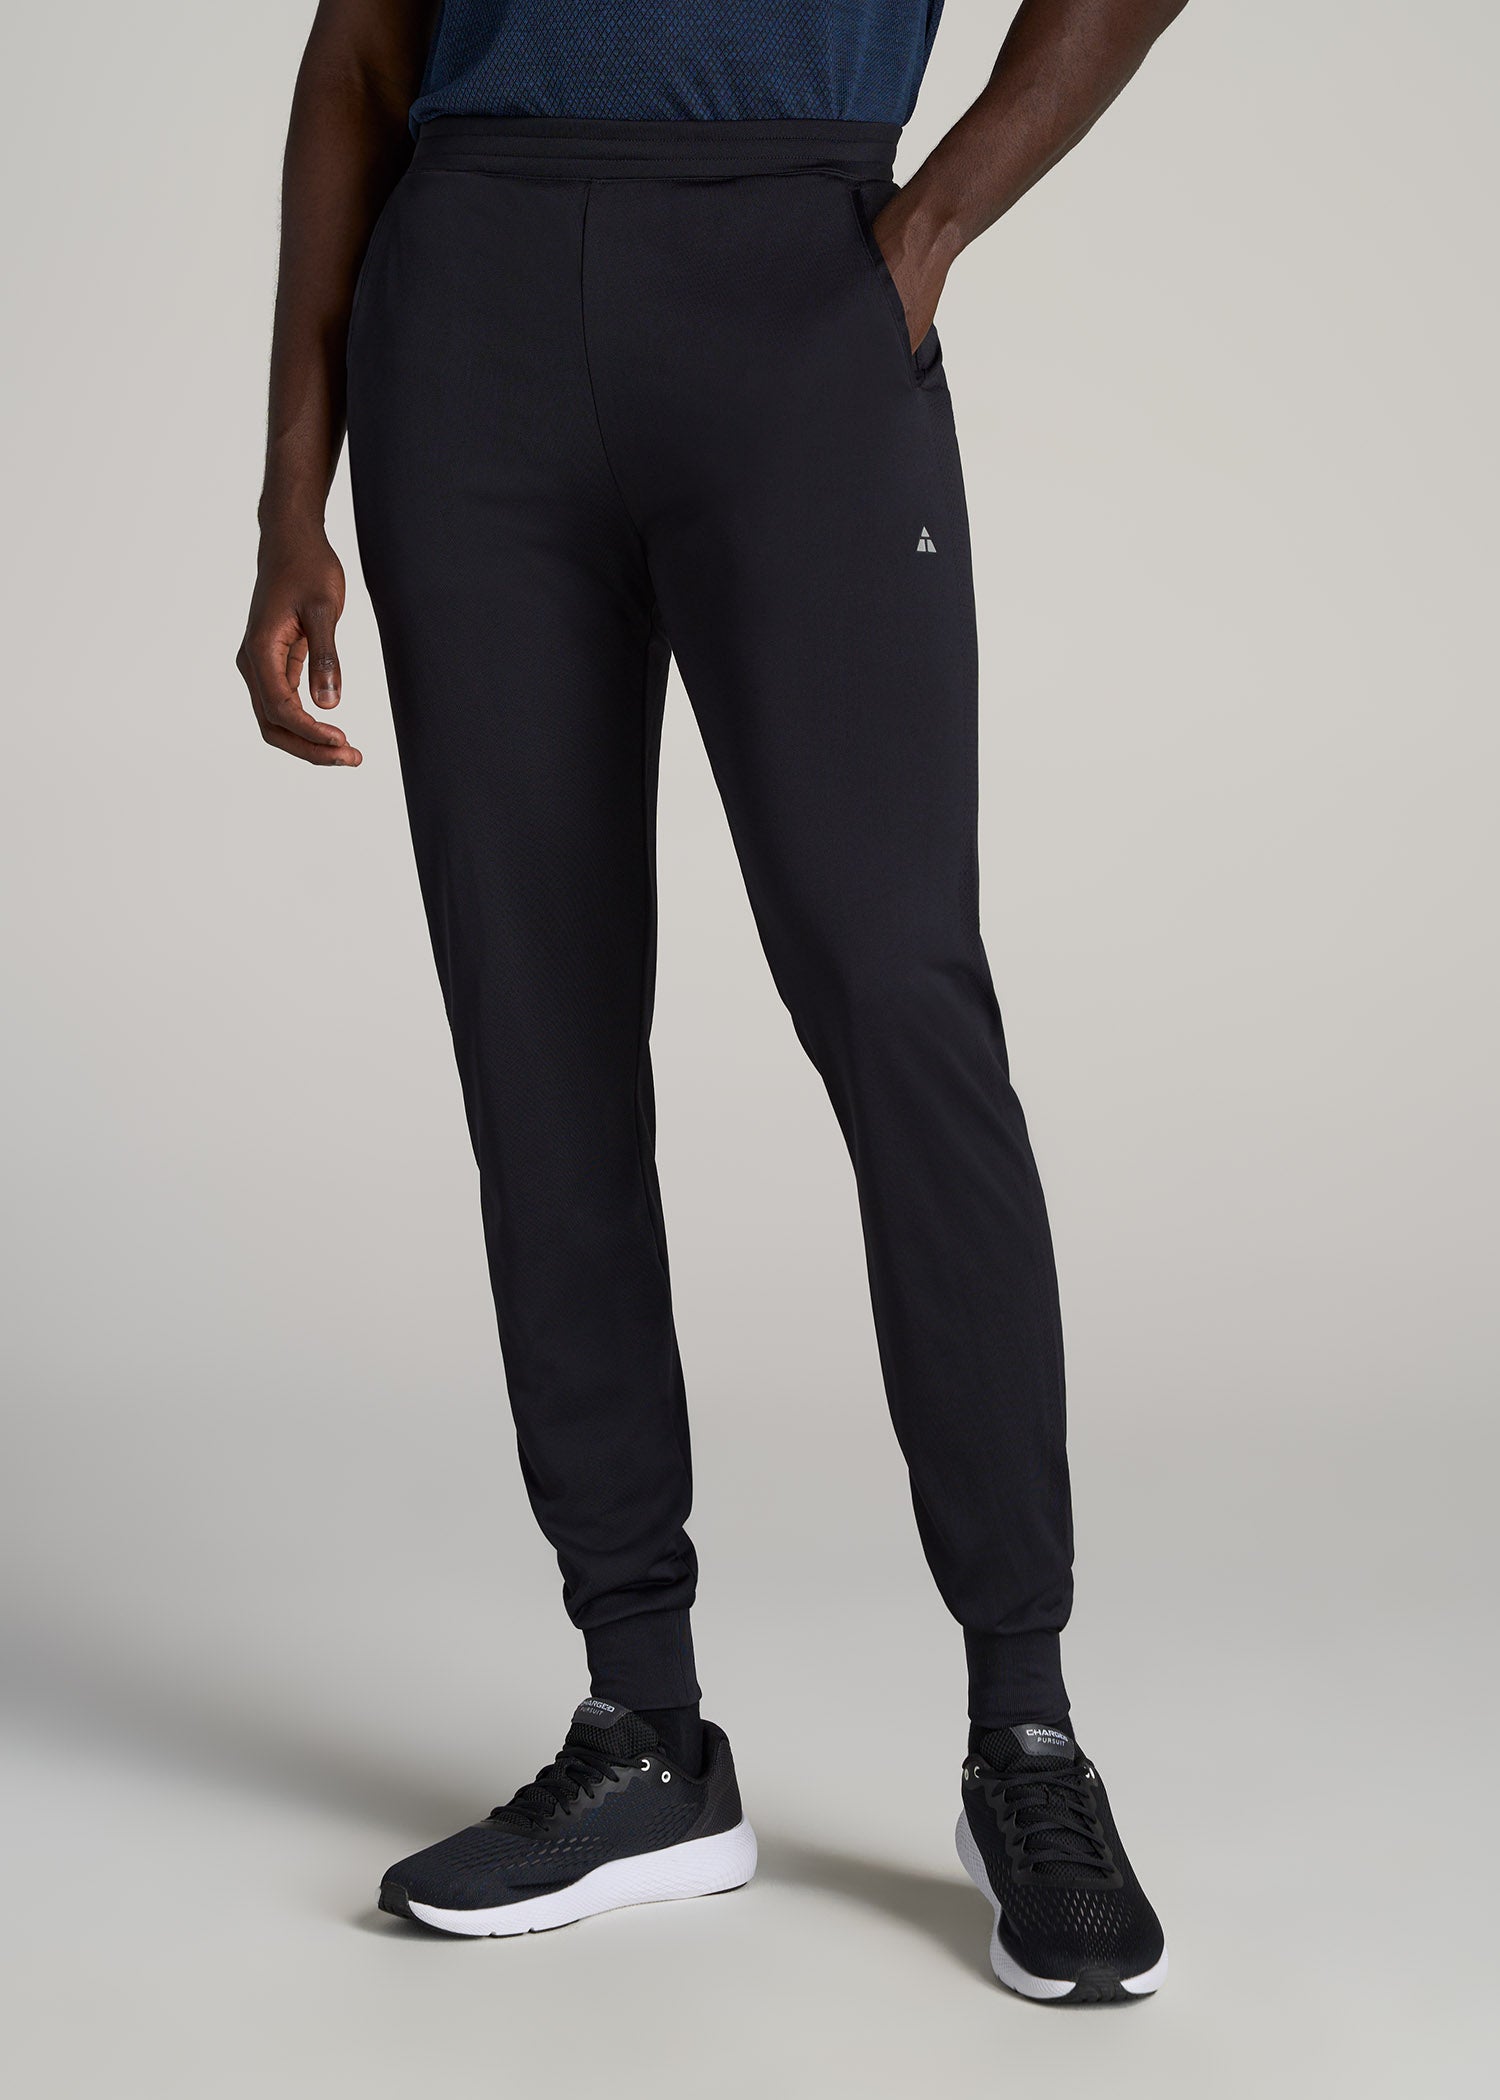 A.T. Performance Athletic Pants